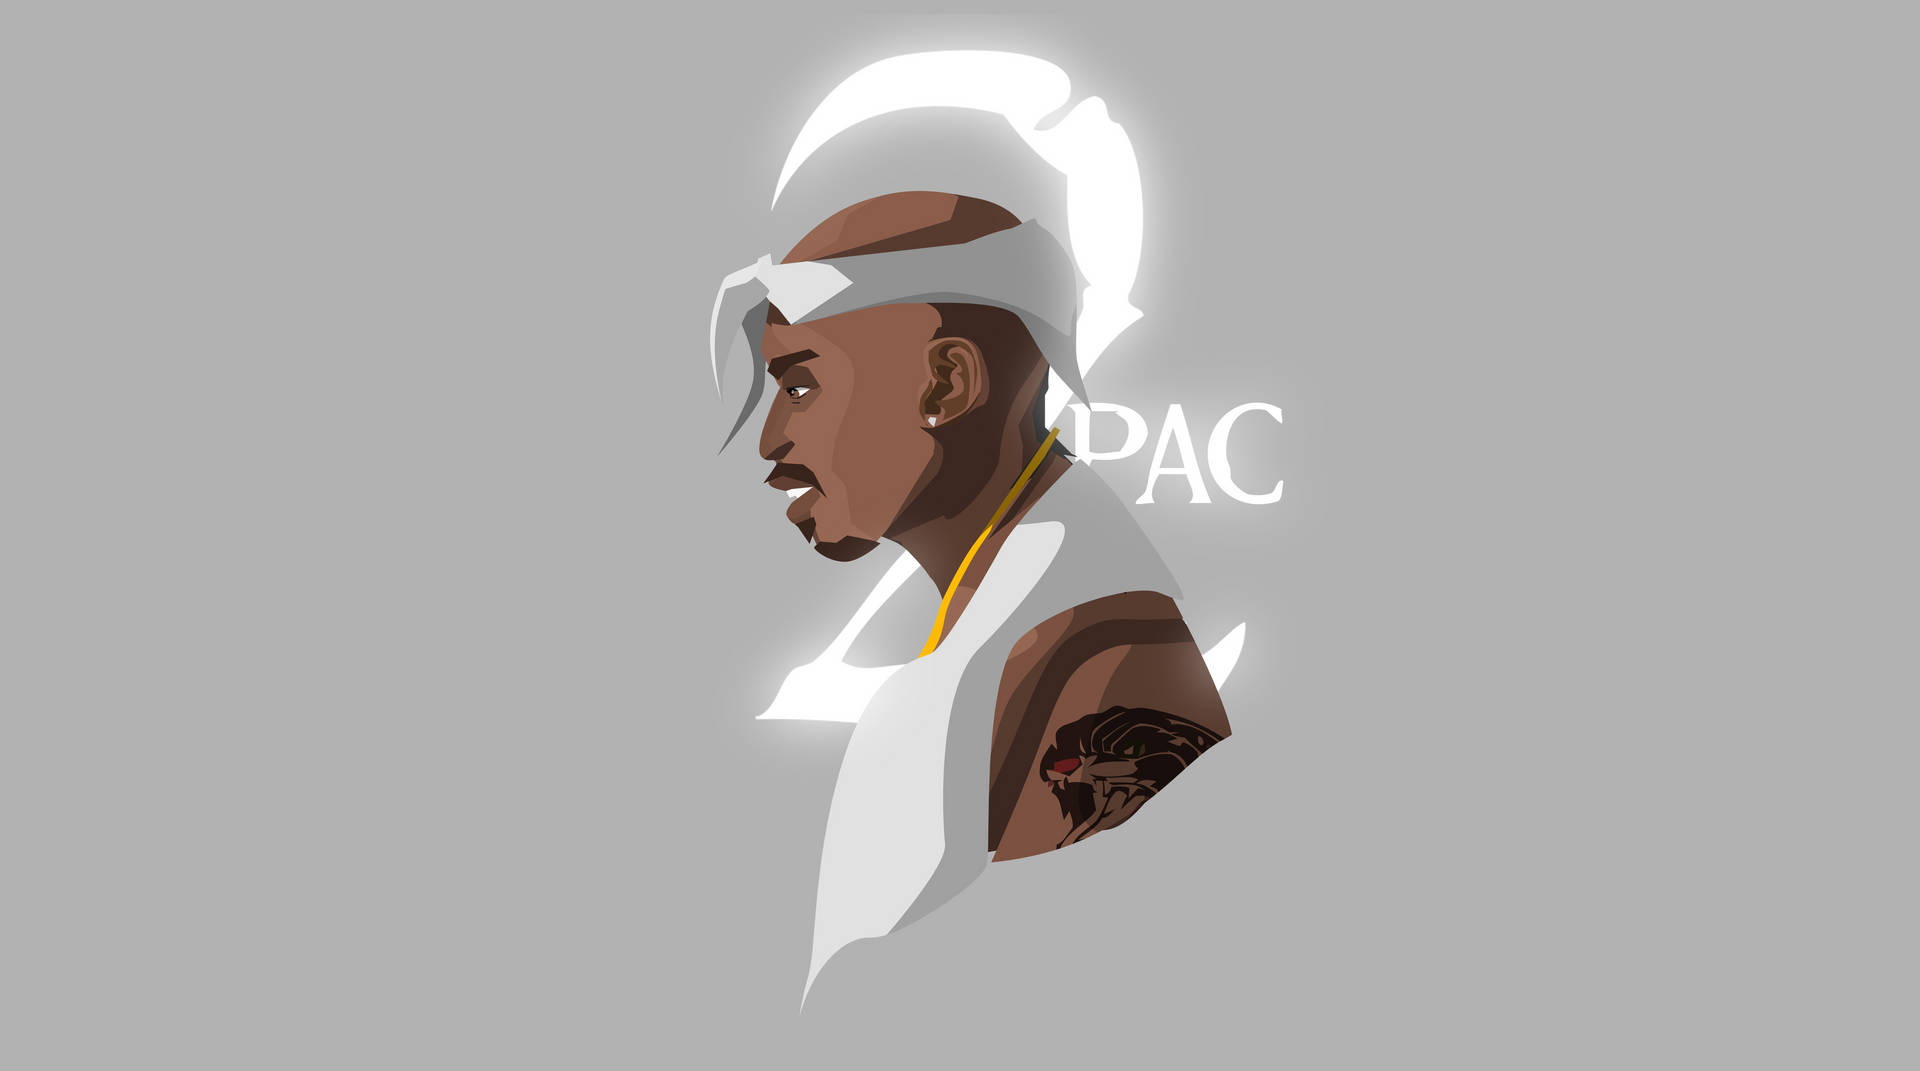 2pac 2d Art In Gray Background